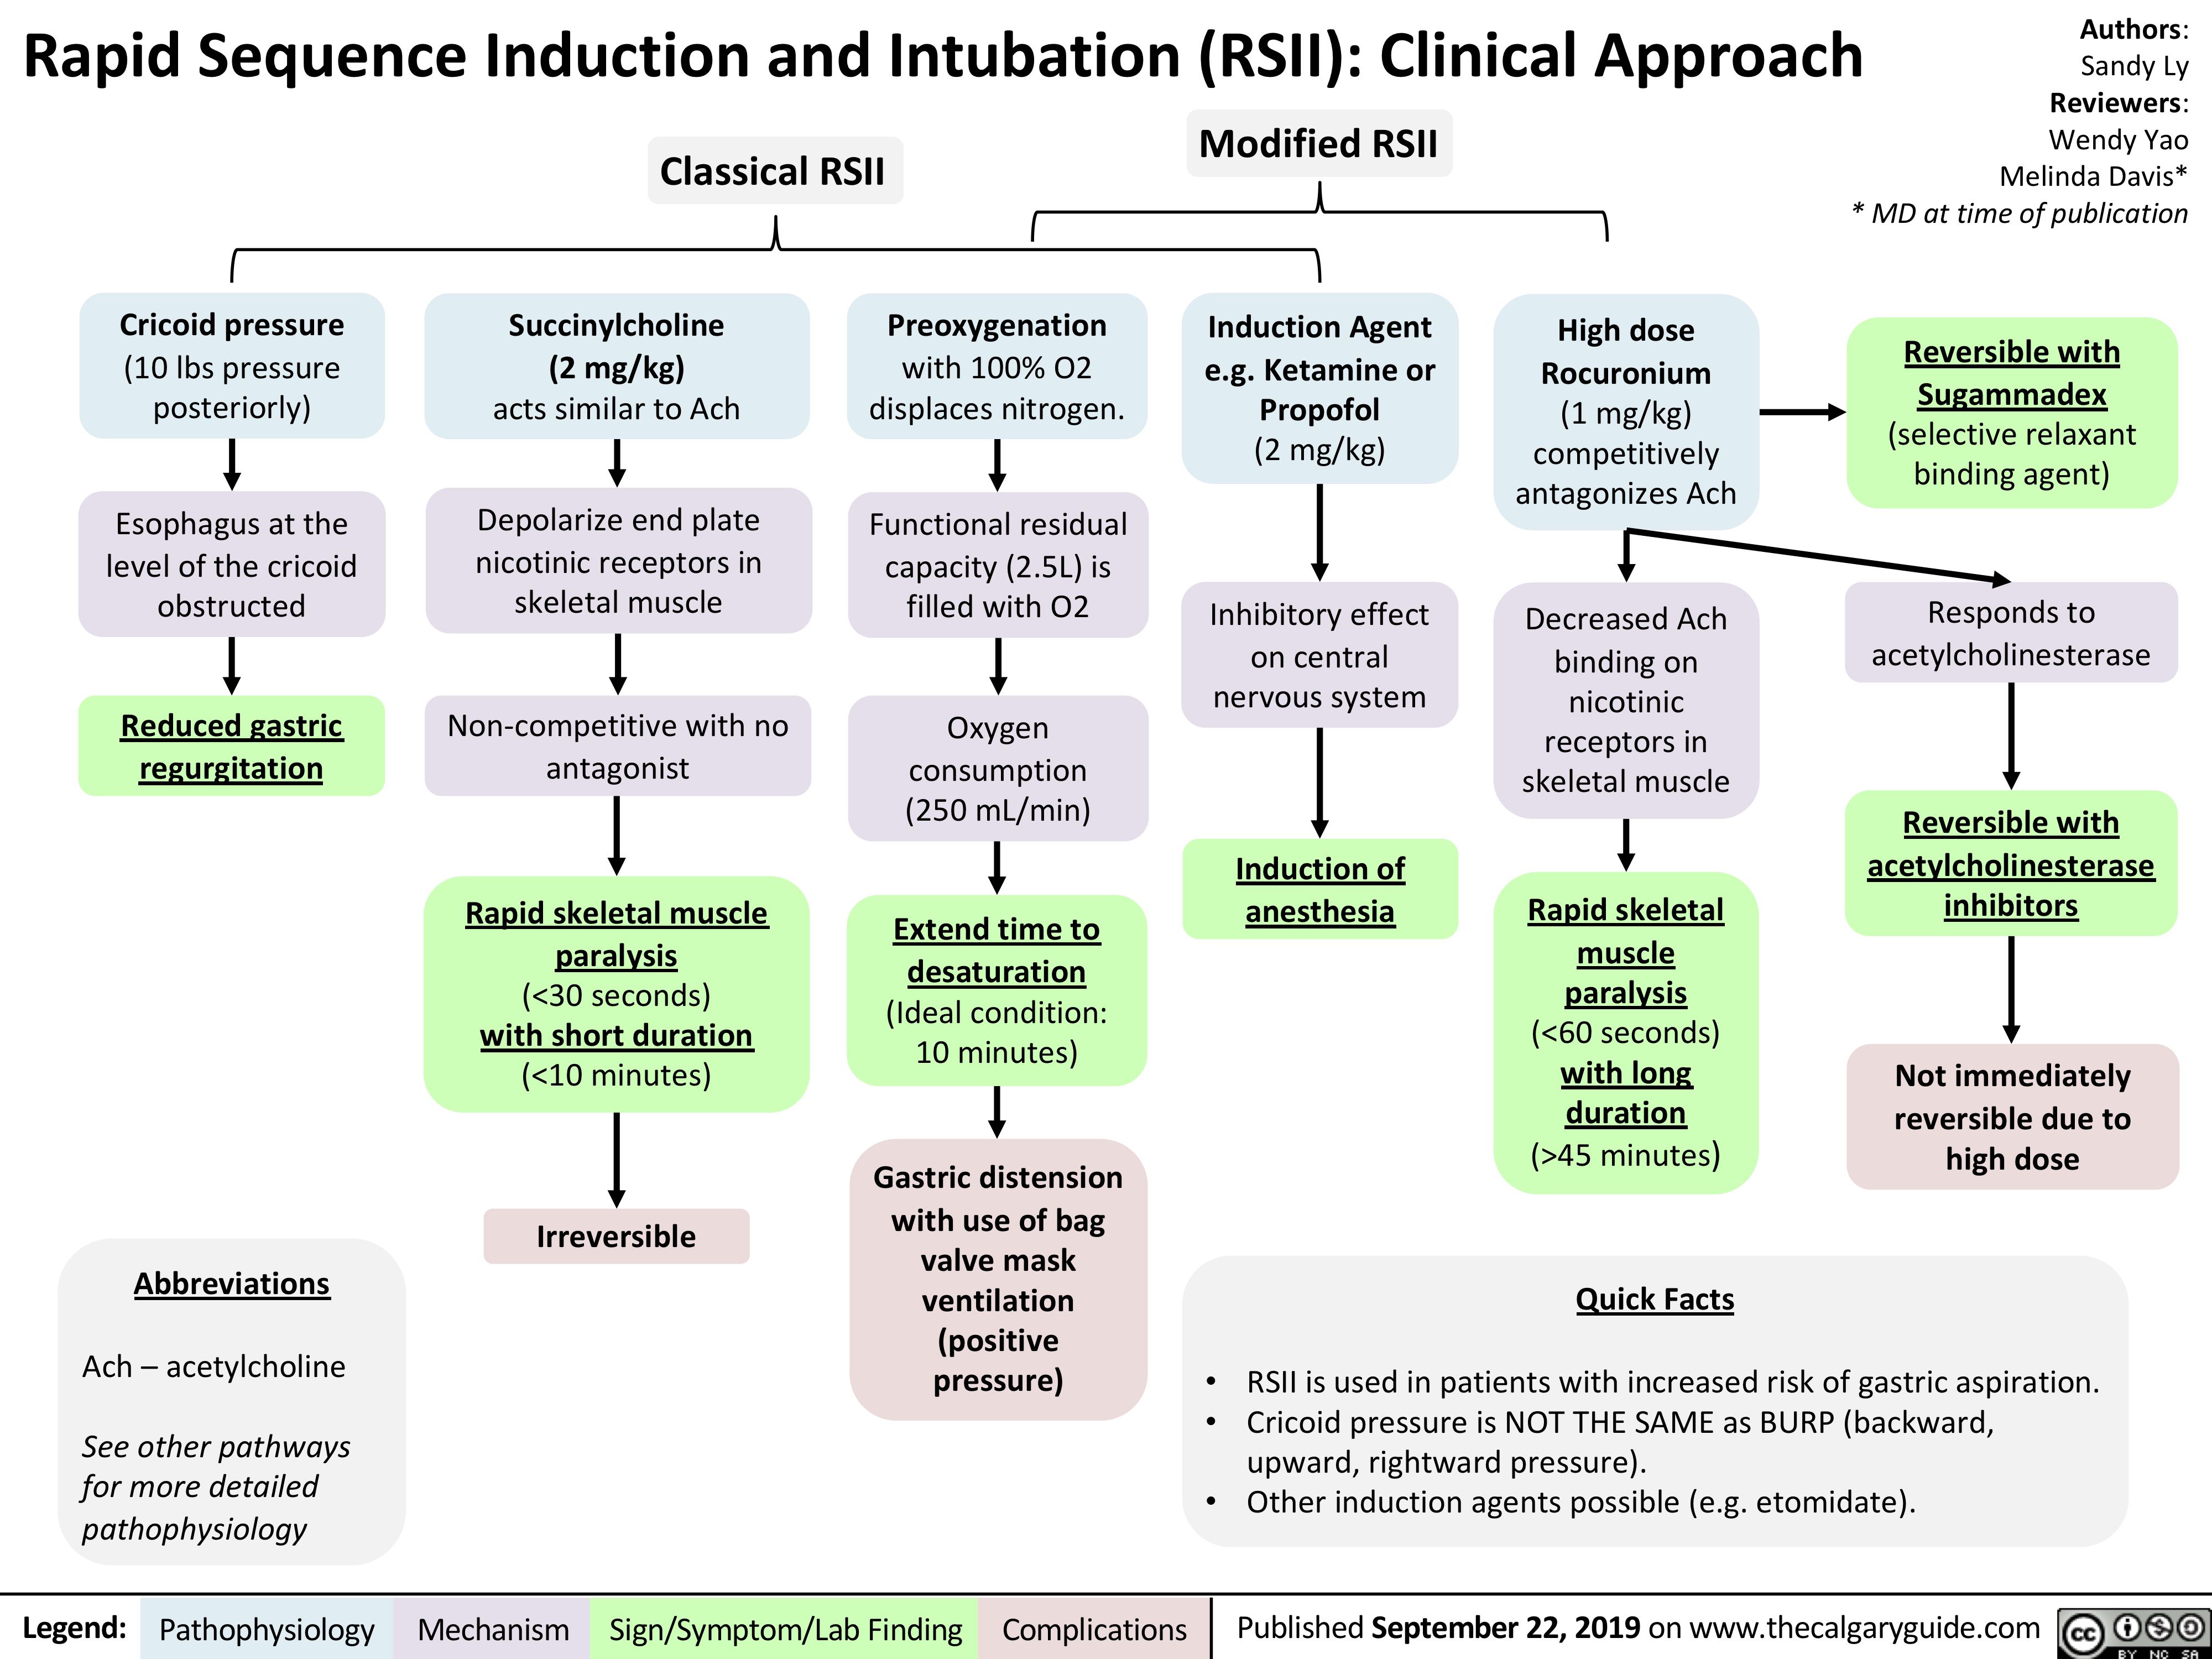 Rapid Sequence Induction and Intubation (RSII): Clinical Approach
Authors:
Sandy Ly Reviewers: Wendy Yao
Melinda Davis*
* MD at time of publication
Reversible with Sugammadex (selective relaxant binding agent)
Responds to acetylcholinesterase
Reversible with acetylcholinesterase inhibitors
Not immediately reversible due to high dose
  Classical RSII
Modified RSII
Induction Agent e.g. Ketamine or Propofol
(2 mg/kg)
Inhibitory effect on central nervous system
       Cricoid pressure
(10 lbs pressure posteriorly)
Esophagus at the level of the cricoid obstructed
Reduced gastric regurgitation
Succinylcholine (2 mg/kg) acts similar to Ach
Depolarize end plate nicotinic receptors in skeletal muscle
Non-competitive with no antagonist
Rapid skeletal muscle paralysis
(<30 seconds) with short duration (<10 minutes)
Irreversible
Preoxygenation
with 100% O2 displaces nitrogen.
Functional residual capacity (2.5L) is filled with O2
Oxygen consumption (250 mL/min)
Extend time to desaturation (Ideal condition: 10 minutes)
Gastric distension with use of bag valve mask ventilation (positive pressure)
High dose Rocuronium (1 mg/kg) competitively antagonizes Ach
Decreased Ach binding on
nicotinic receptors in skeletal muscle
Rapid skeletal muscle paralysis (<60 seconds) with long duration (>45 minutes)
Quick Facts
                             Induction of anesthesia
                Abbreviations
Ach – acetylcholine
See other pathways for more detailed pathophysiology
• •
•
RSII is used in patients with increased risk of gastric aspiration. Cricoid pressure is NOT THE SAME as BURP (backward, upward, rightward pressure).
Other induction agents possible (e.g. etomidate).
   Legend:
 Pathophysiology
 Mechanism
Sign/Symptom/Lab Finding
  Complications
Published September 22, 2019 on www.thecalgaryguide.com
   